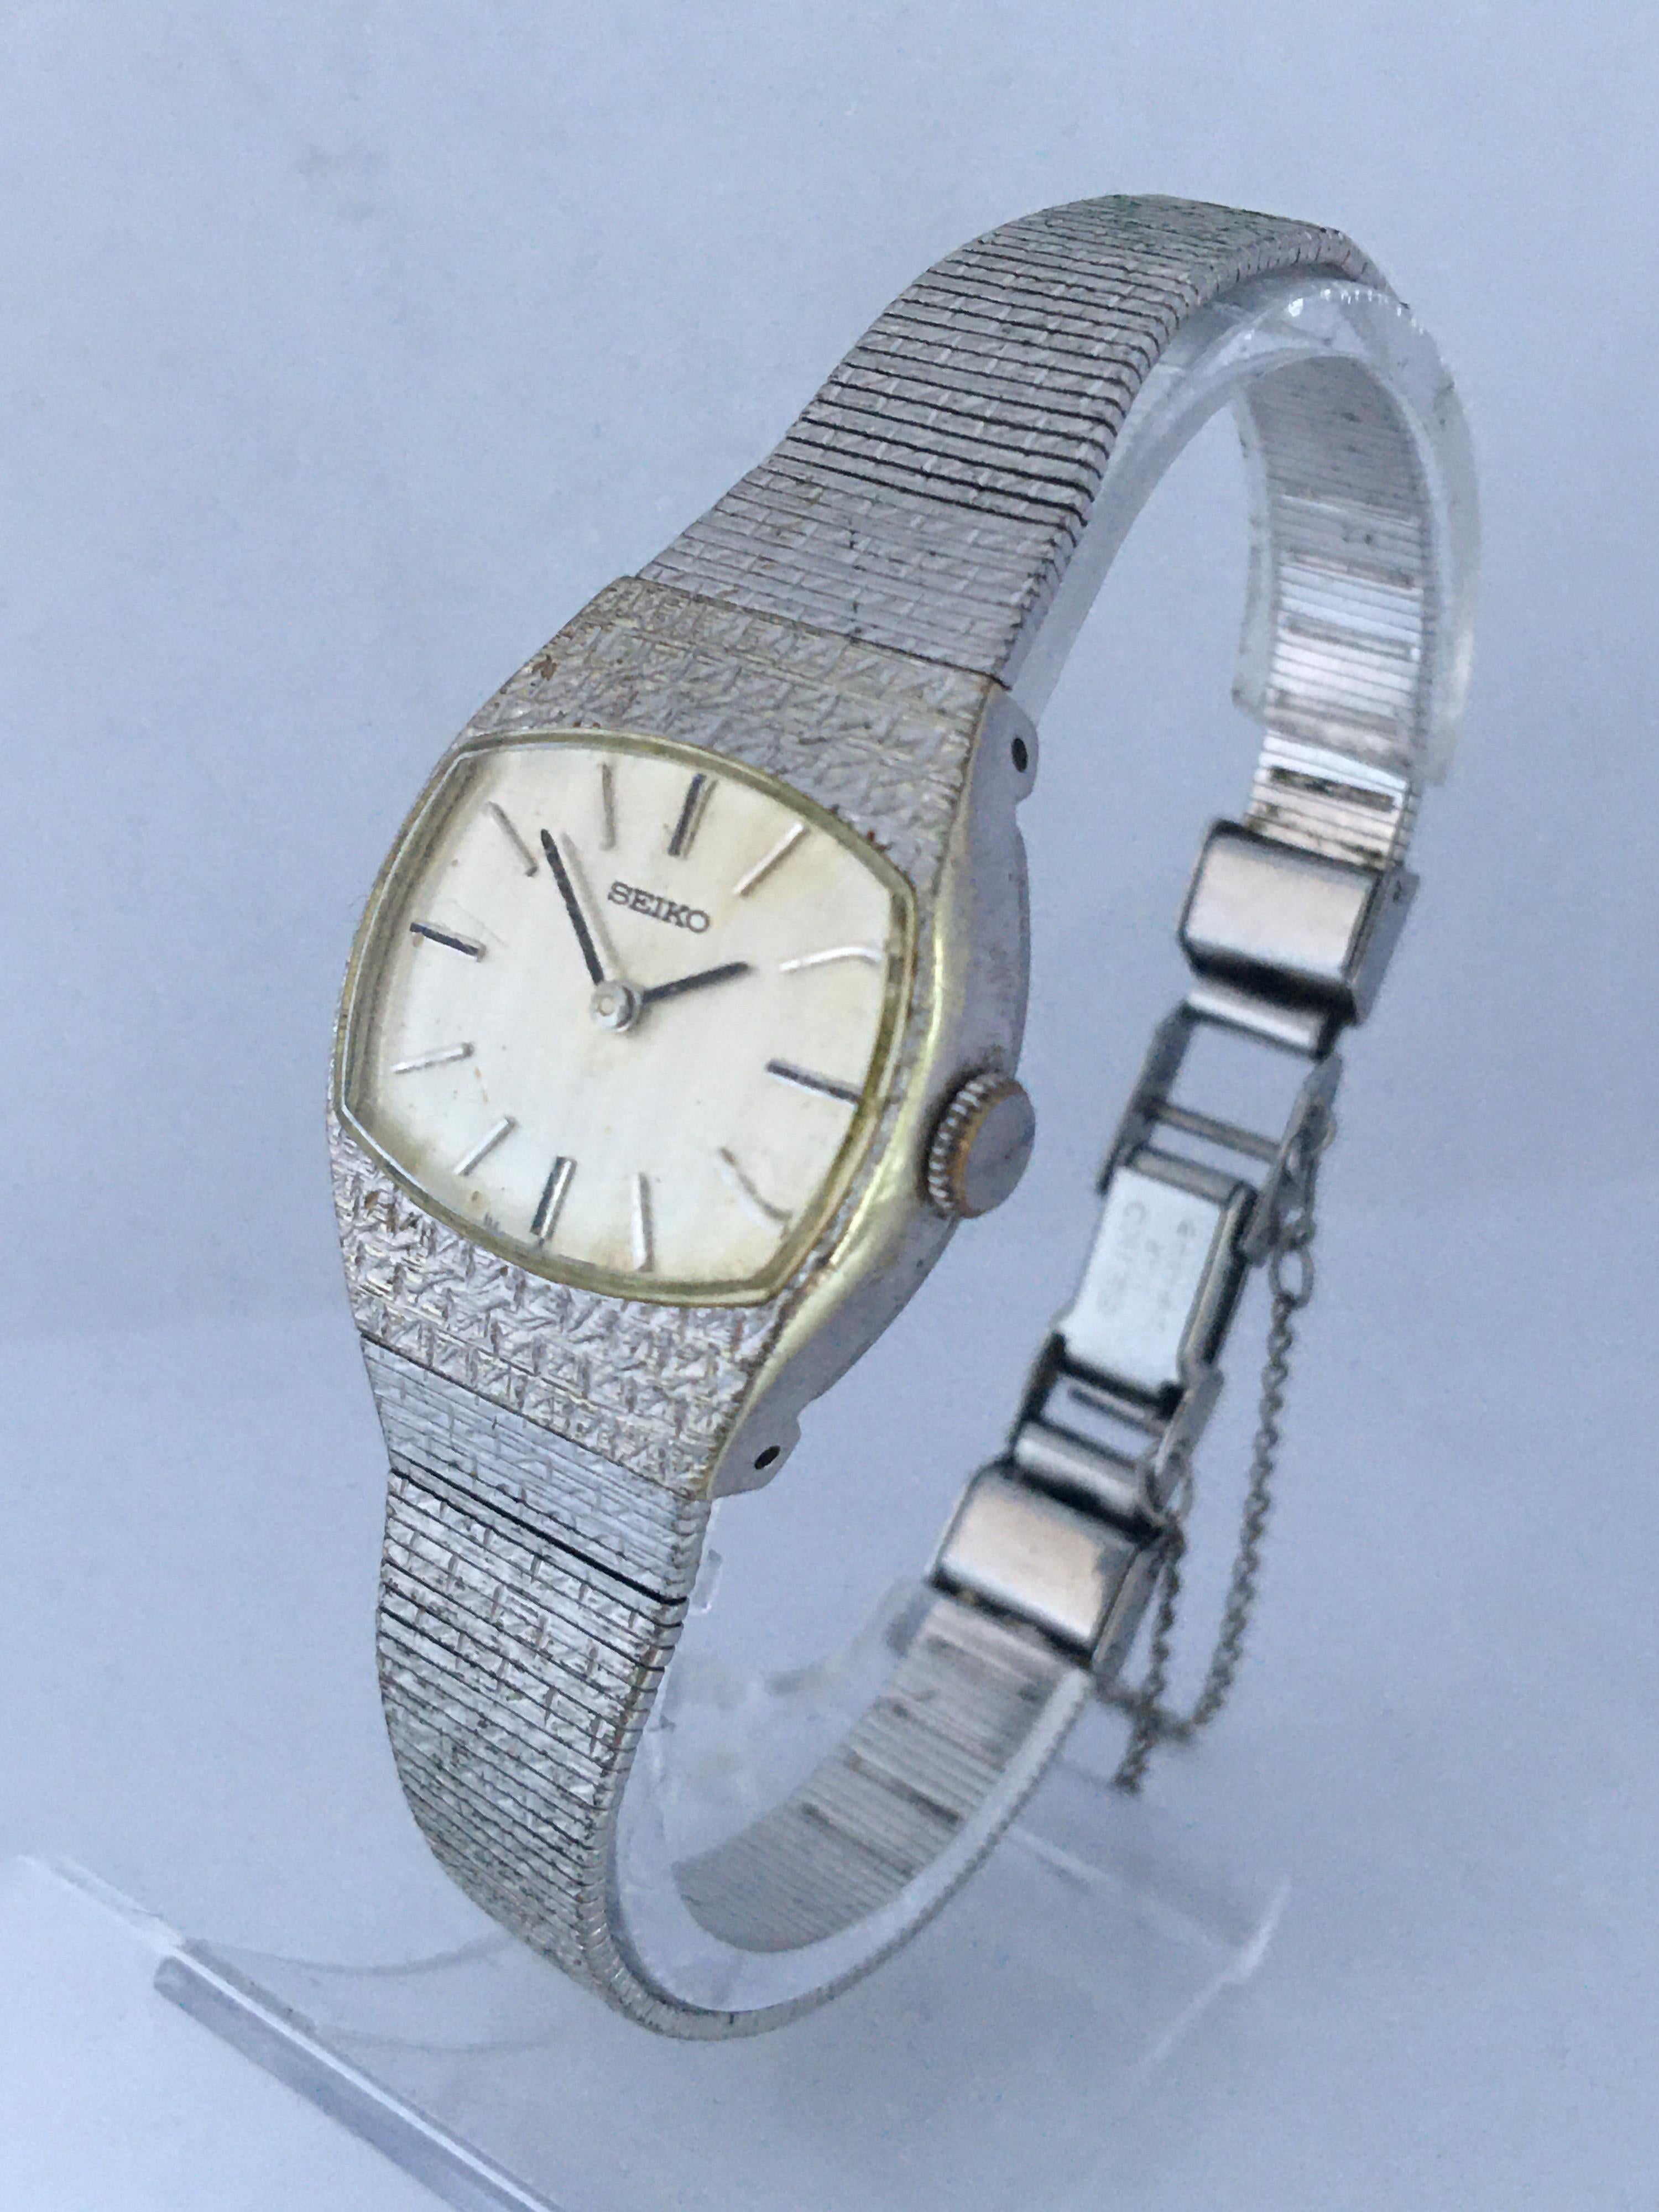 This beautiful 6.5 inches bracelet pre-owned Ladies Watch is working and it is running well. Visible signs of ageing and wear with light marks on its stainless steel back bracelet surface and some light tarnishes

Please study the images carefully